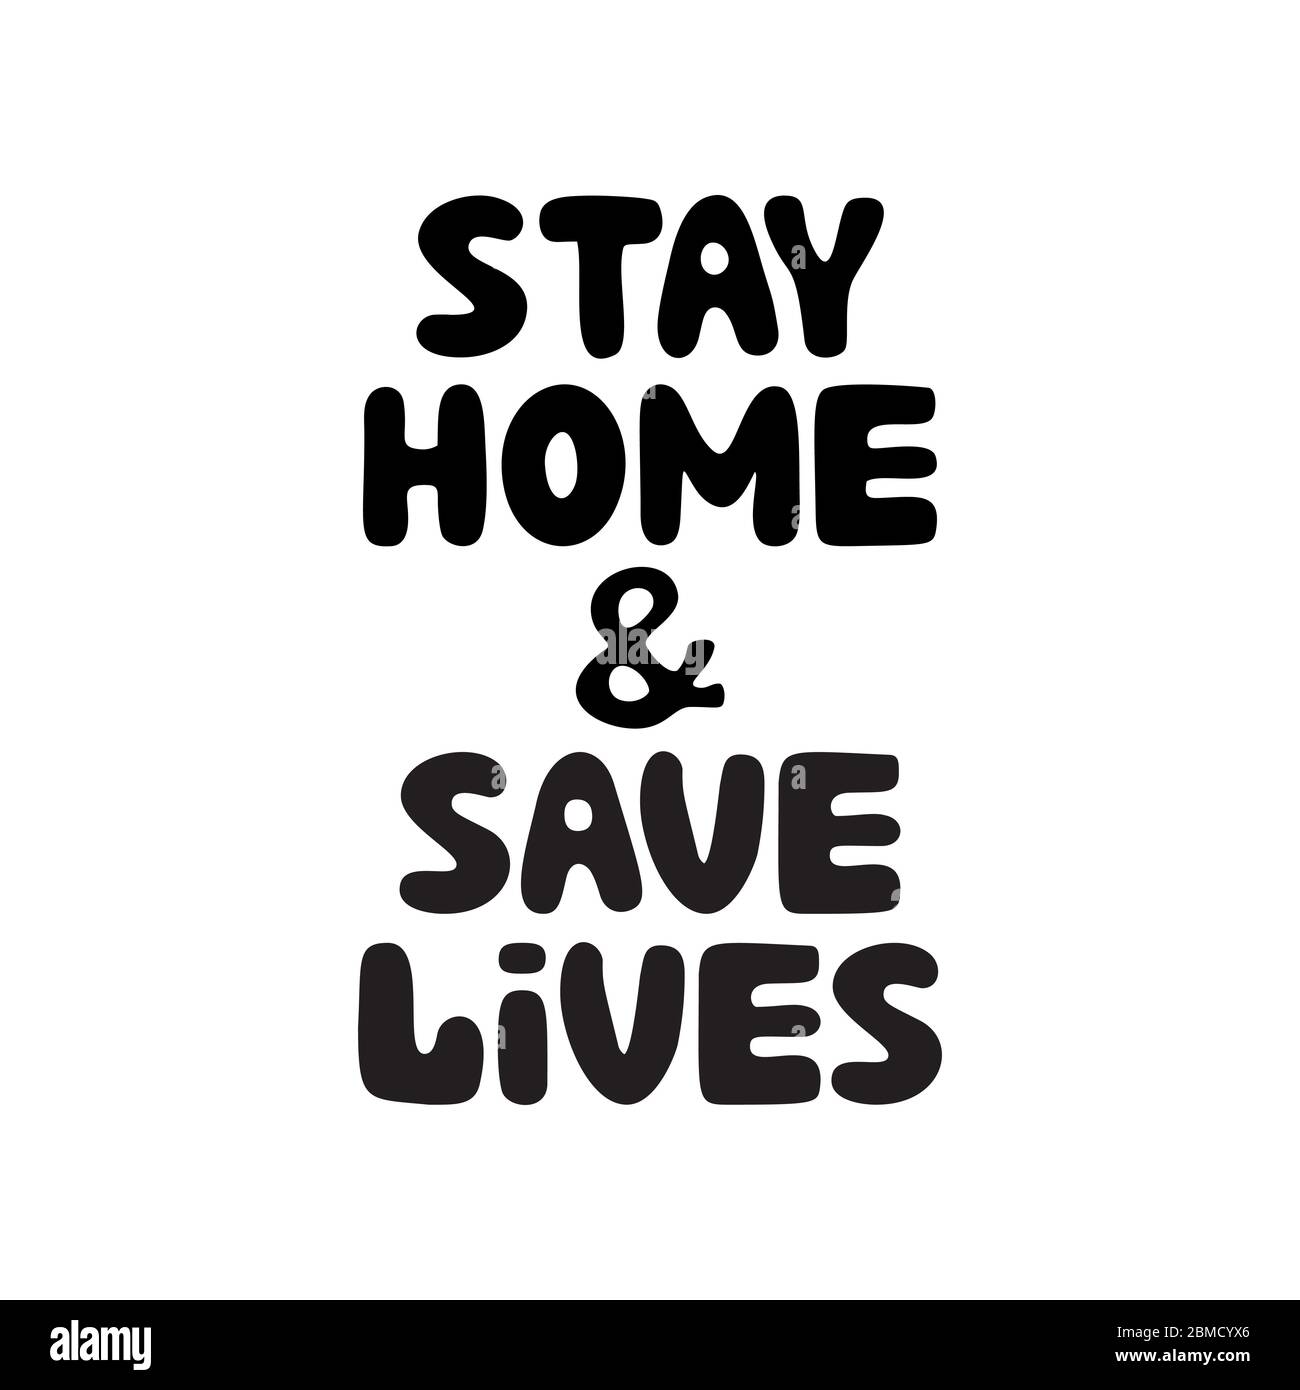 Stay home and save lives. Cute hand drawn doodle bubble lettering. Isolated on white background. Vector stock illustration. Stock Vector